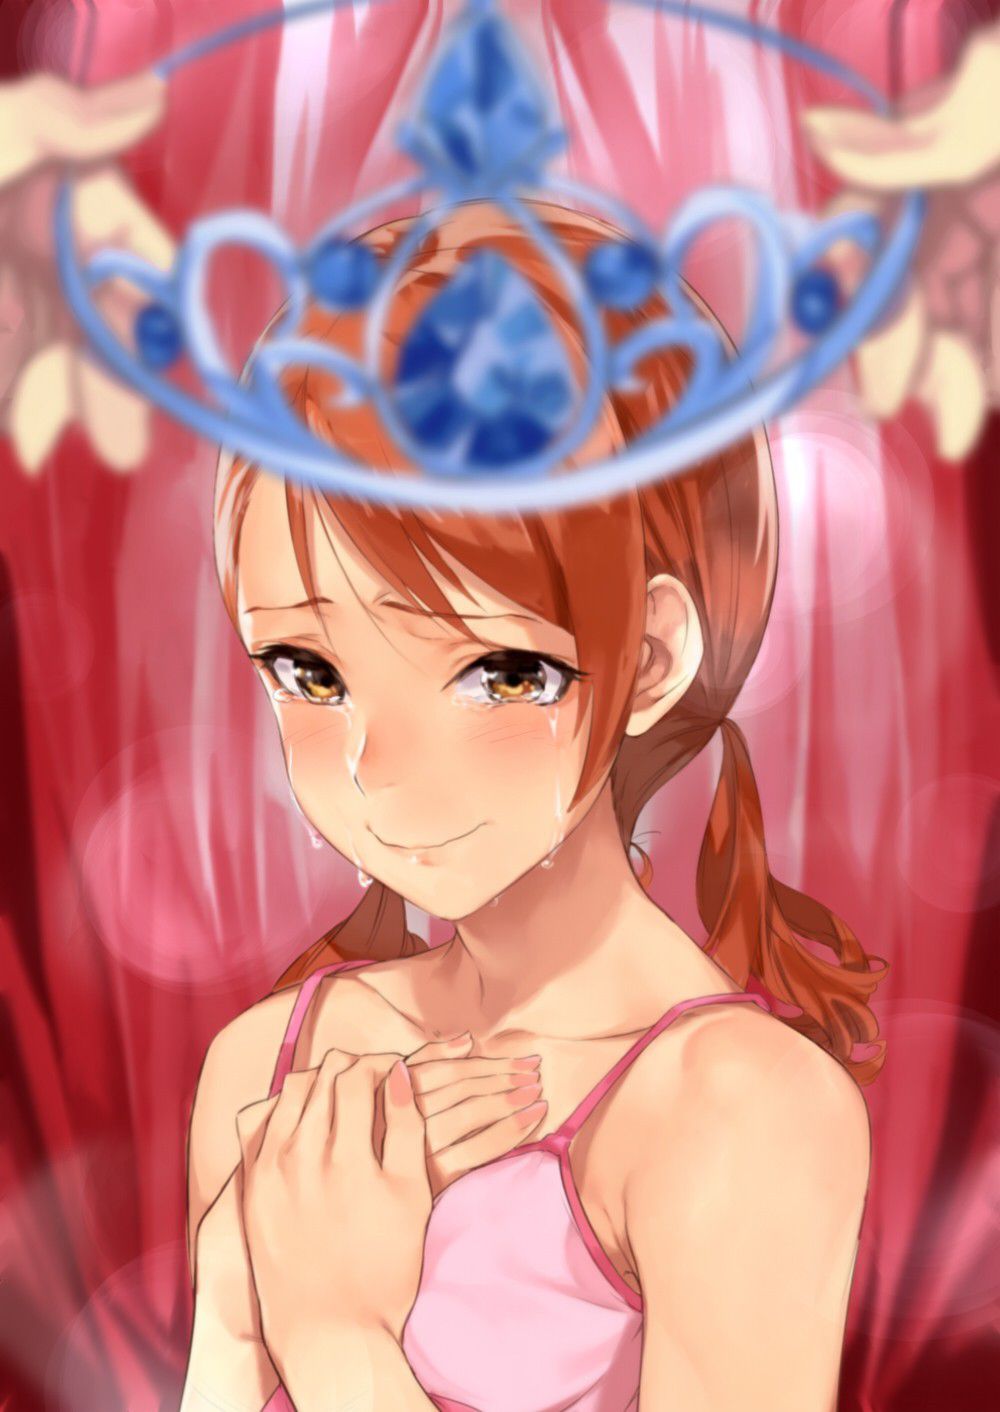 Collection of erotic images of the Idolmaster 19